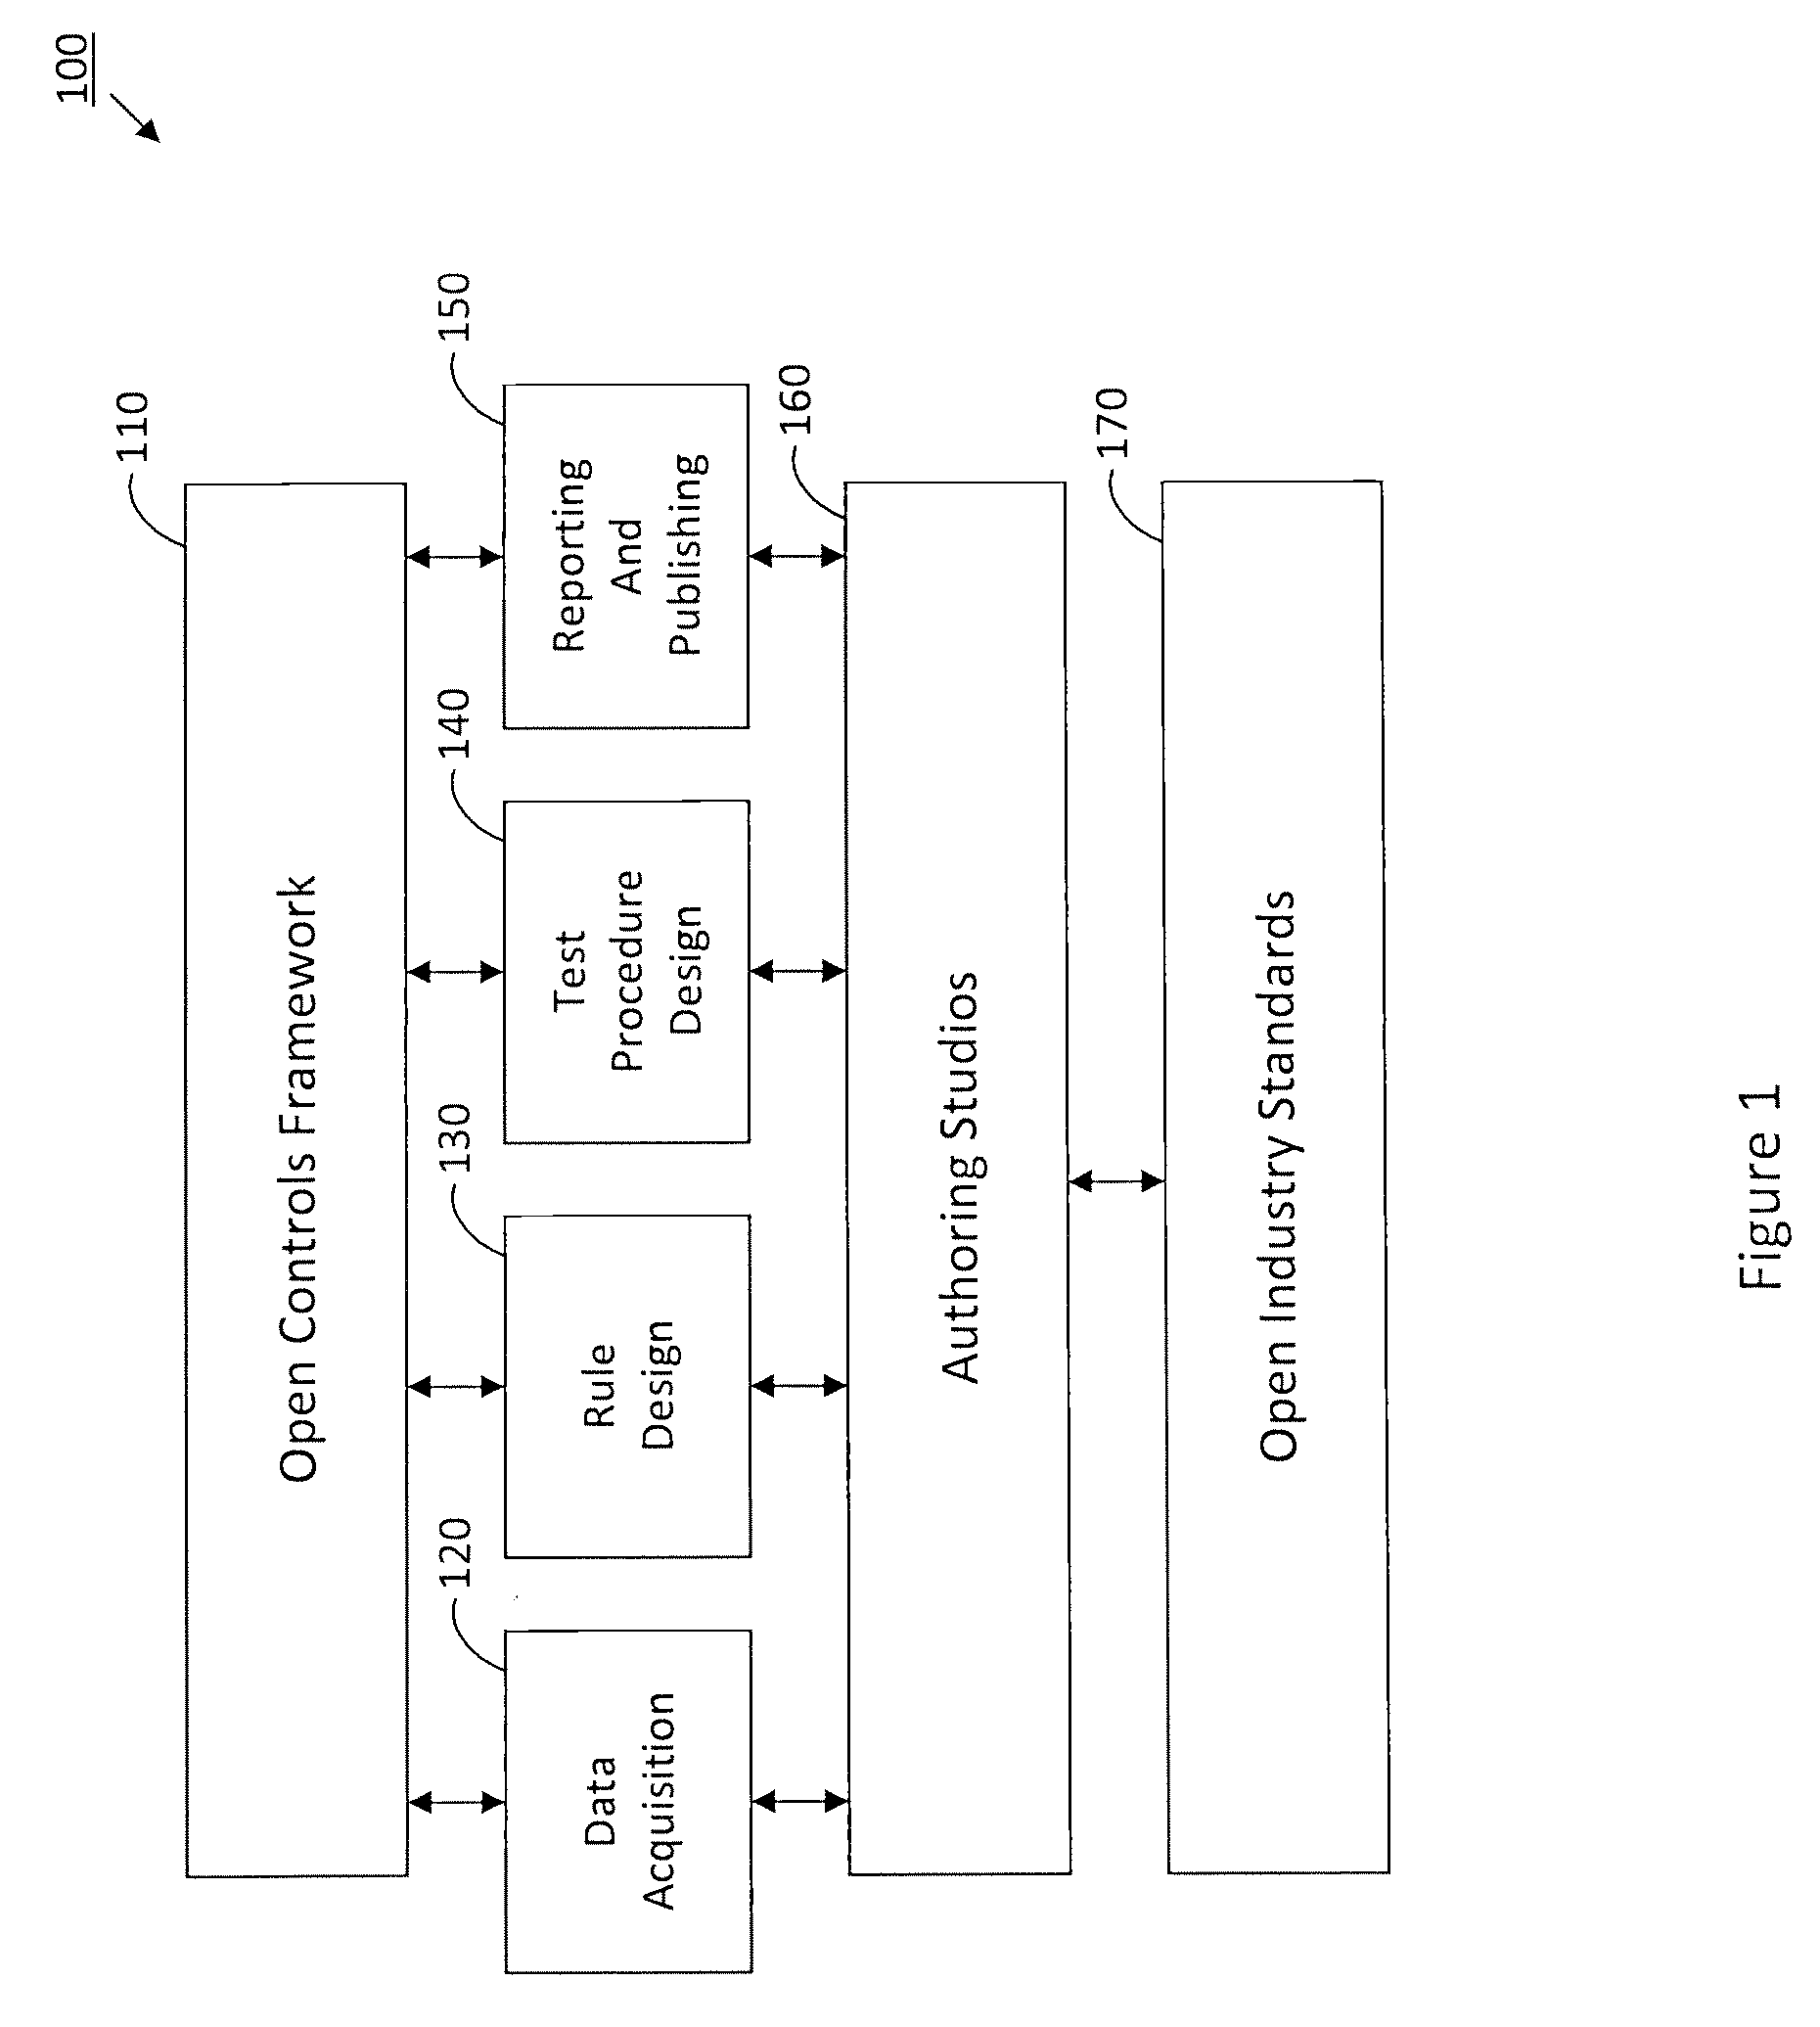 System and method for managing controls within a heterogeneous enterprise environment